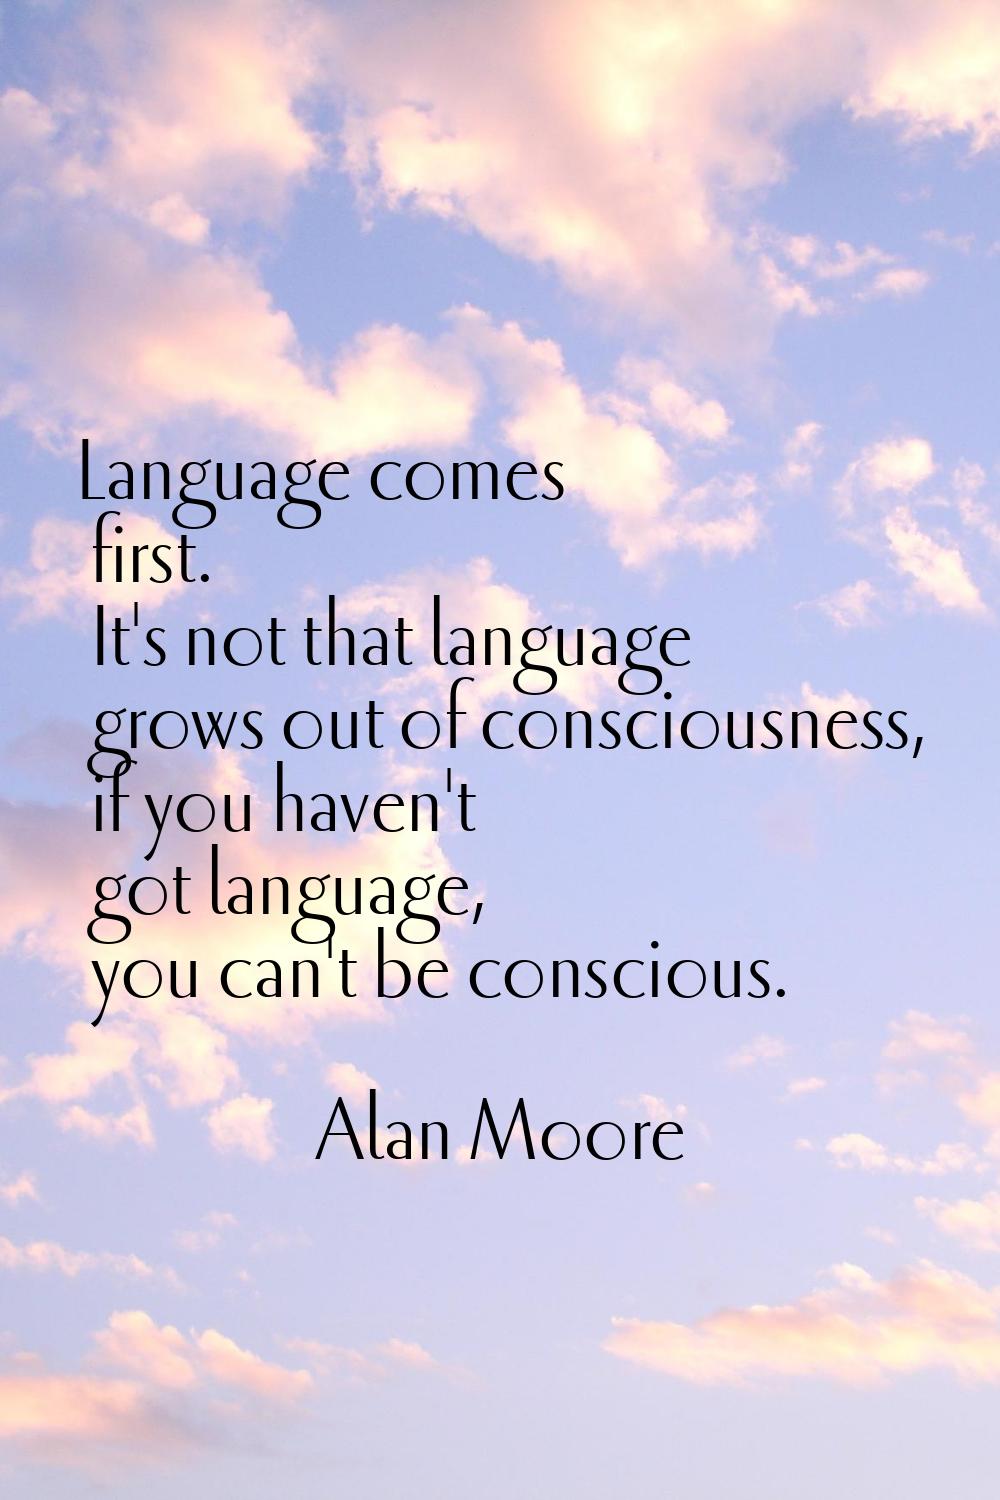 Language comes first. It's not that language grows out of consciousness, if you haven't got languag